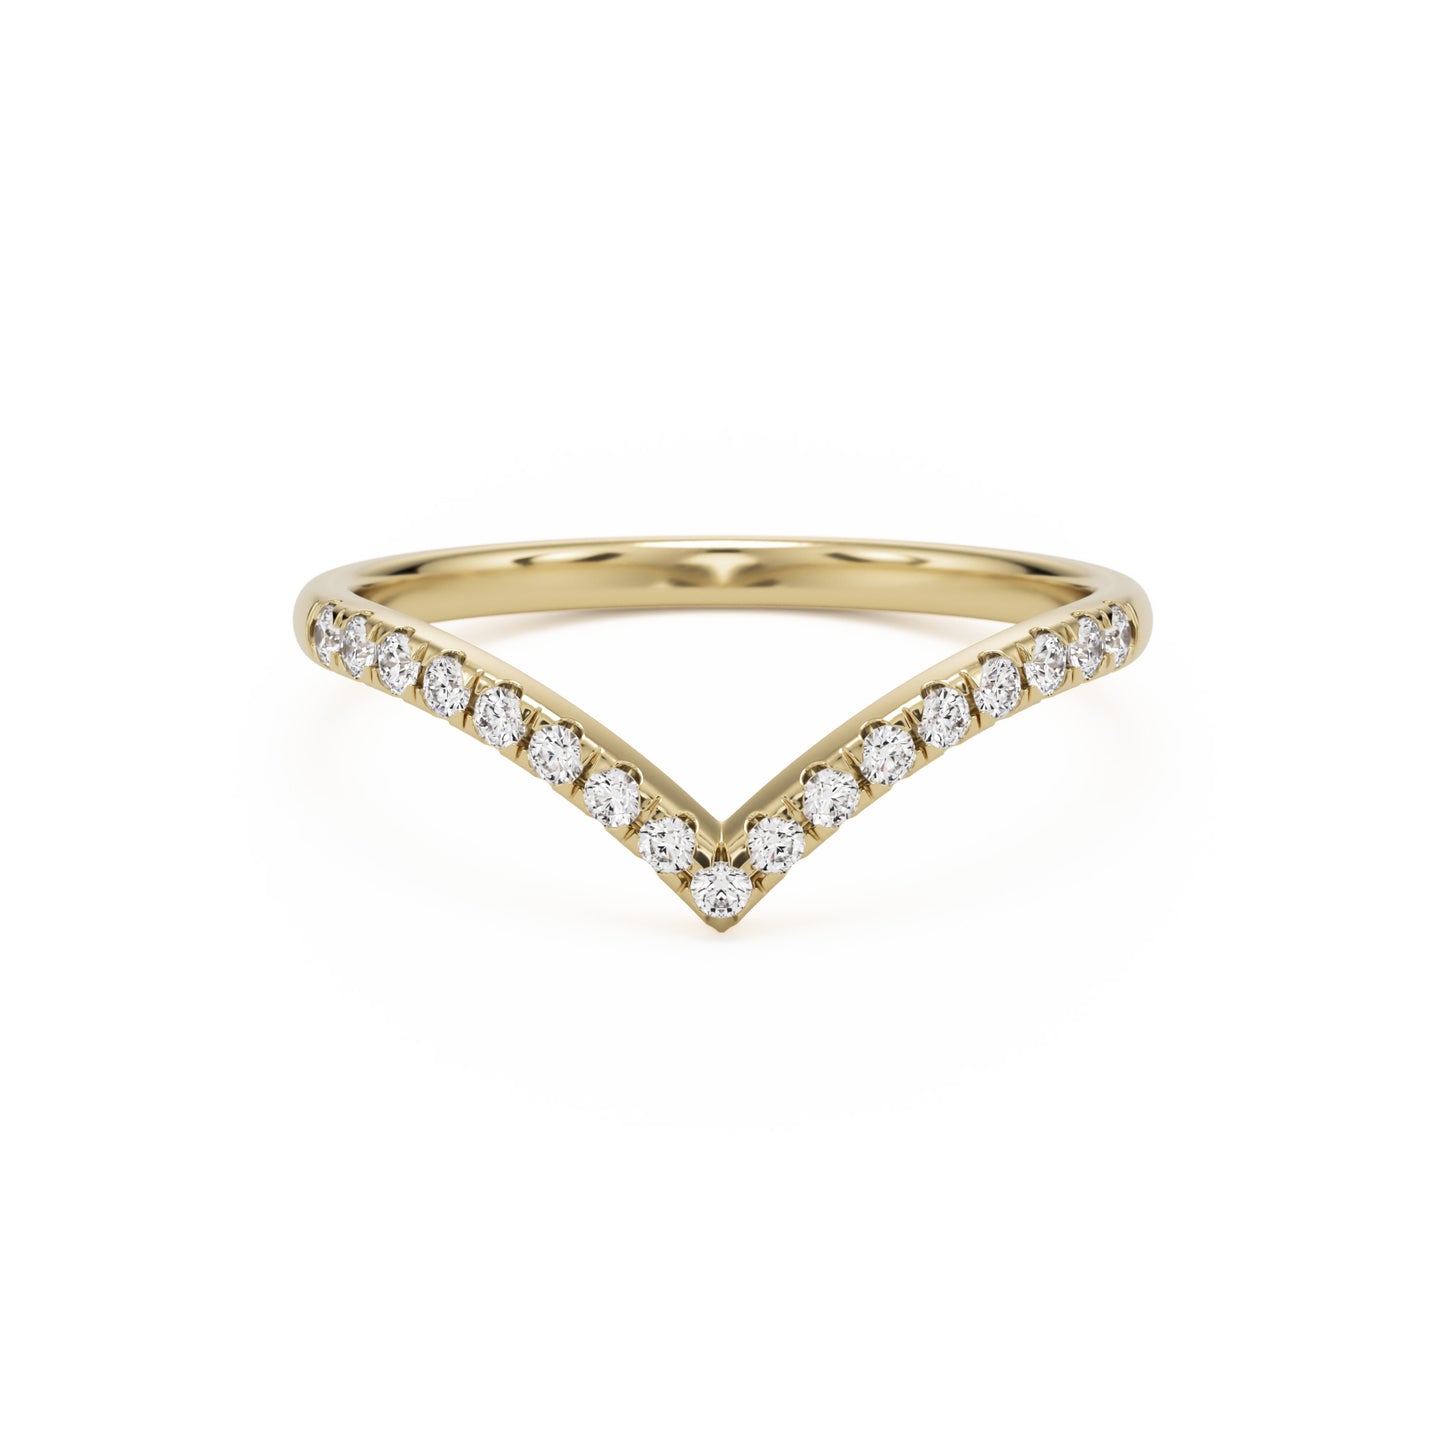 soft point pave wedding band 14k yellow gold